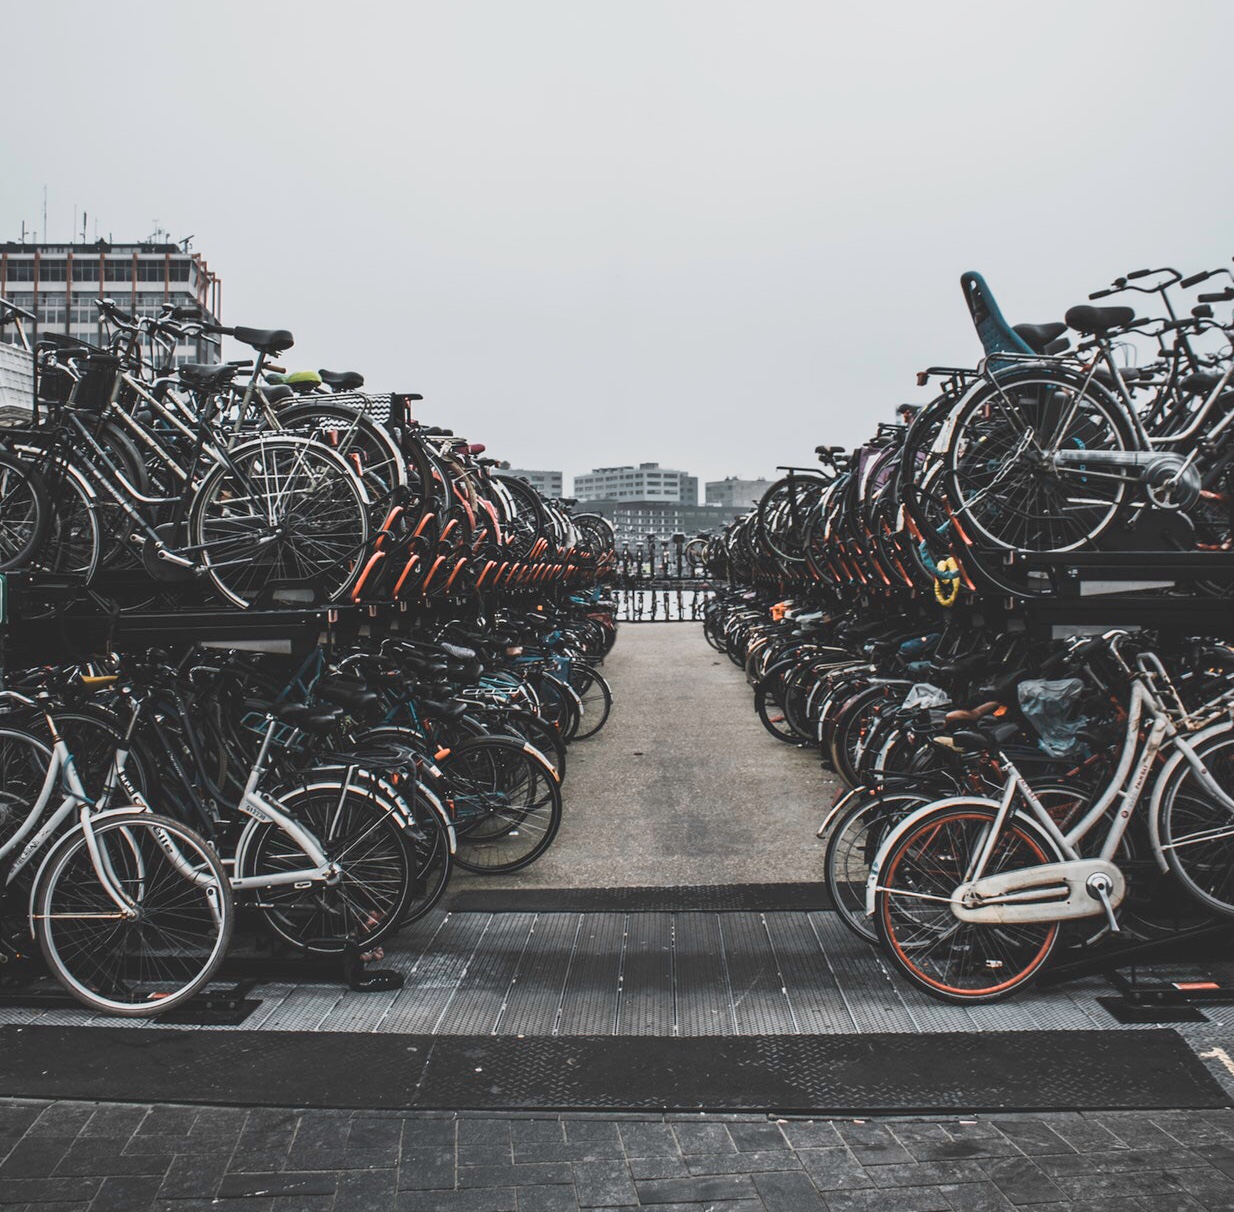 The Dutch capital just announced plans to replace all gasoline and diesel-powered cars and motorcycles with electric vehicles in a bid to address shocking rates of air pollution in the city. Click link for more details:?